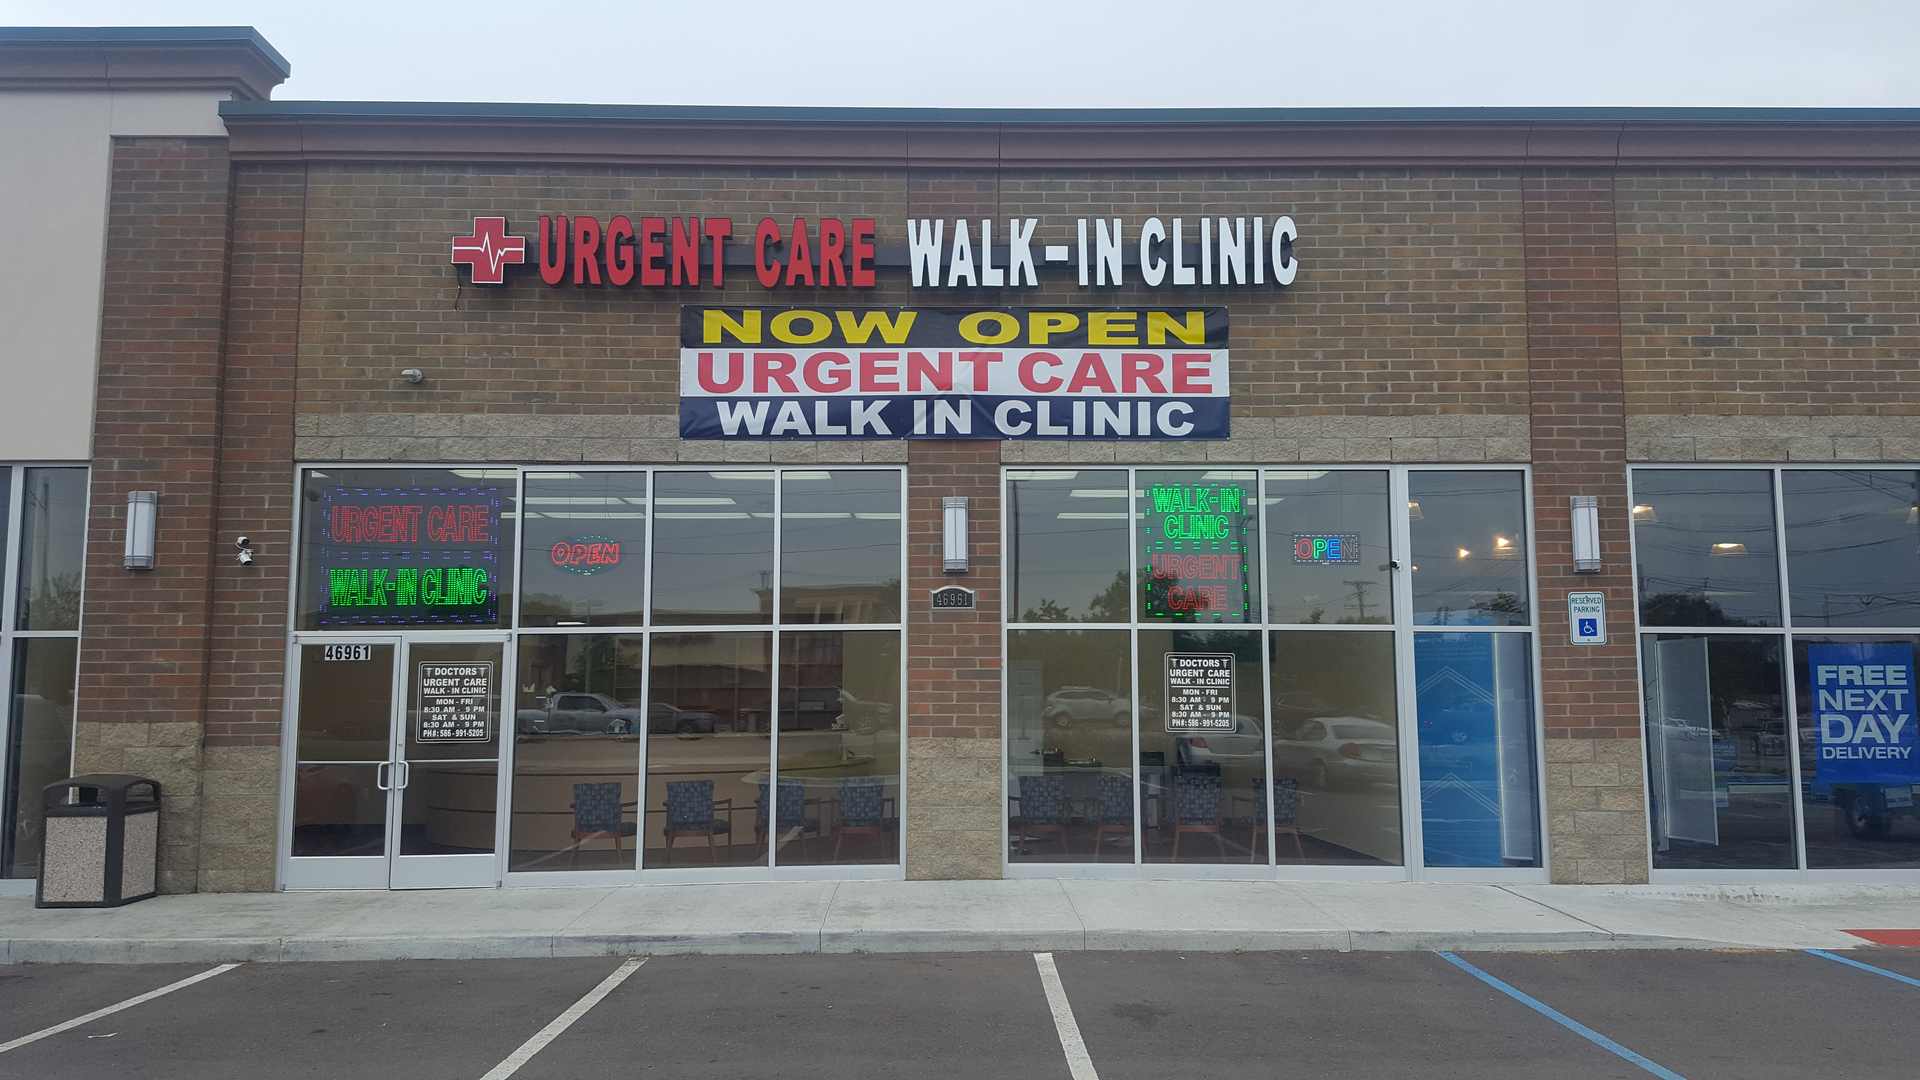 Doctors Urgent Care Walk-in Clinic - Shelby MI reviews | 46961 Van Dyke Ave - Shelby Township MI